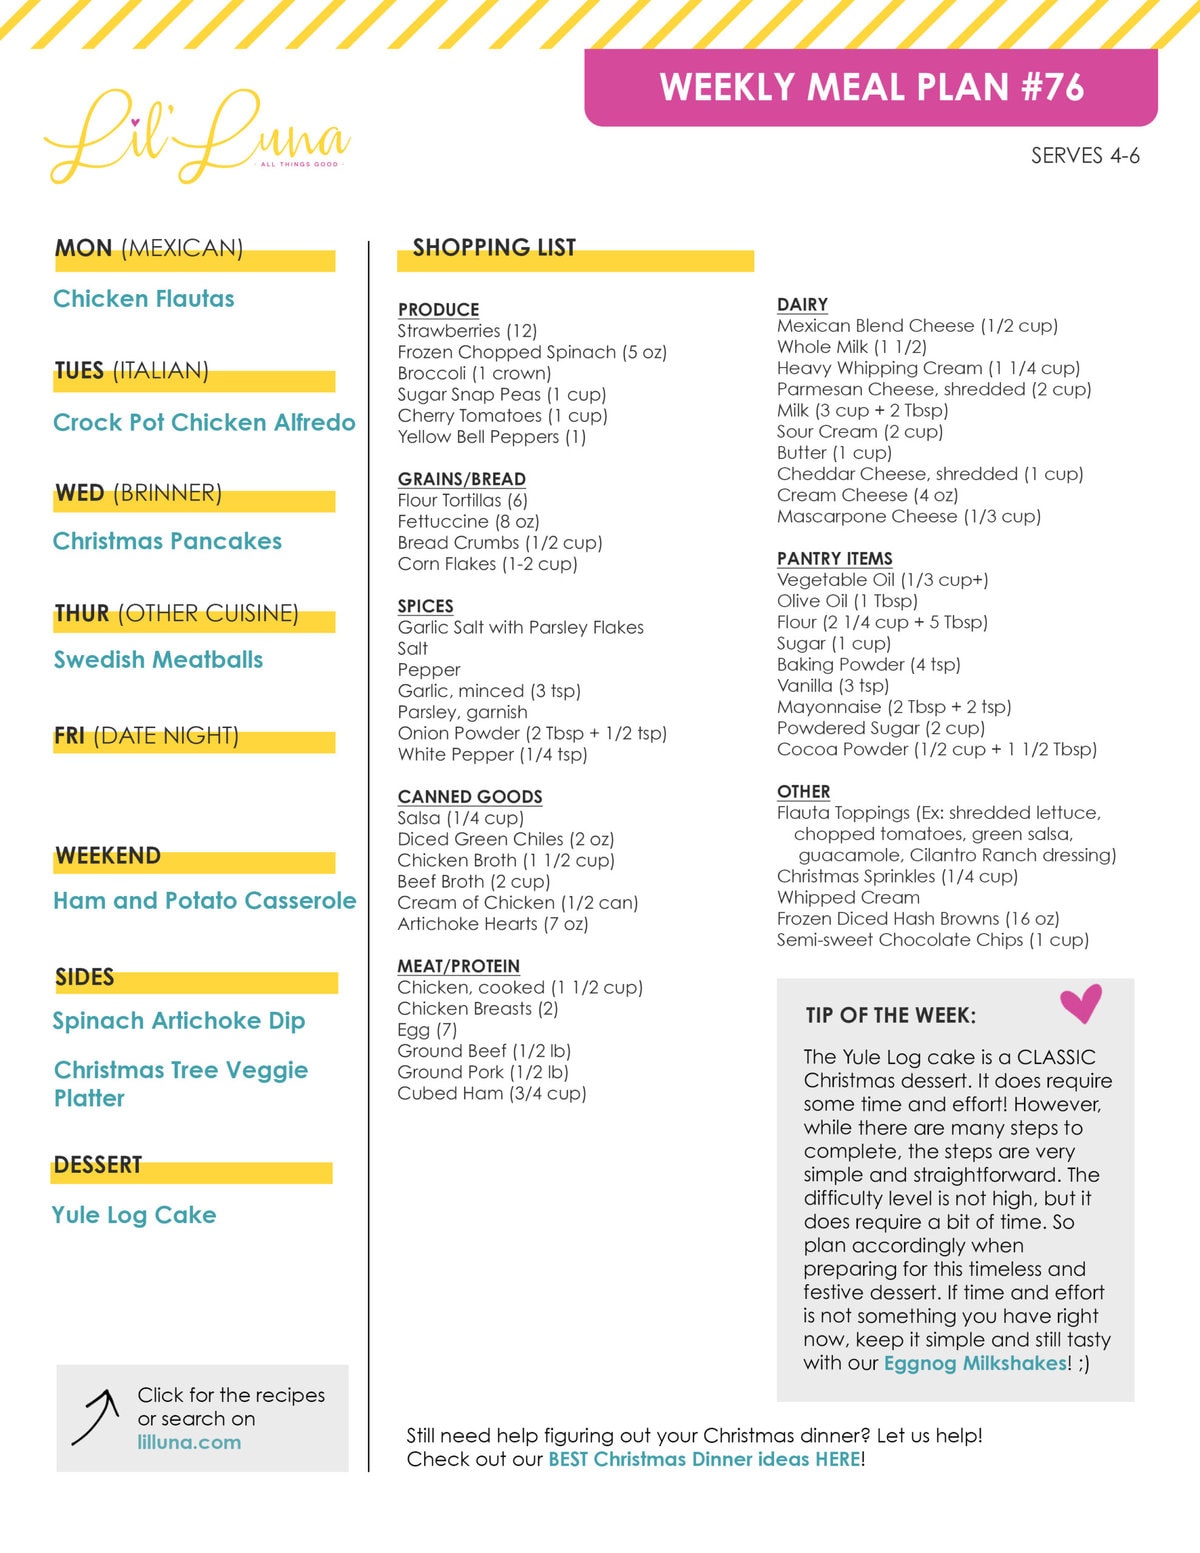 Printable version of Meal Plan #76 with grocery list.